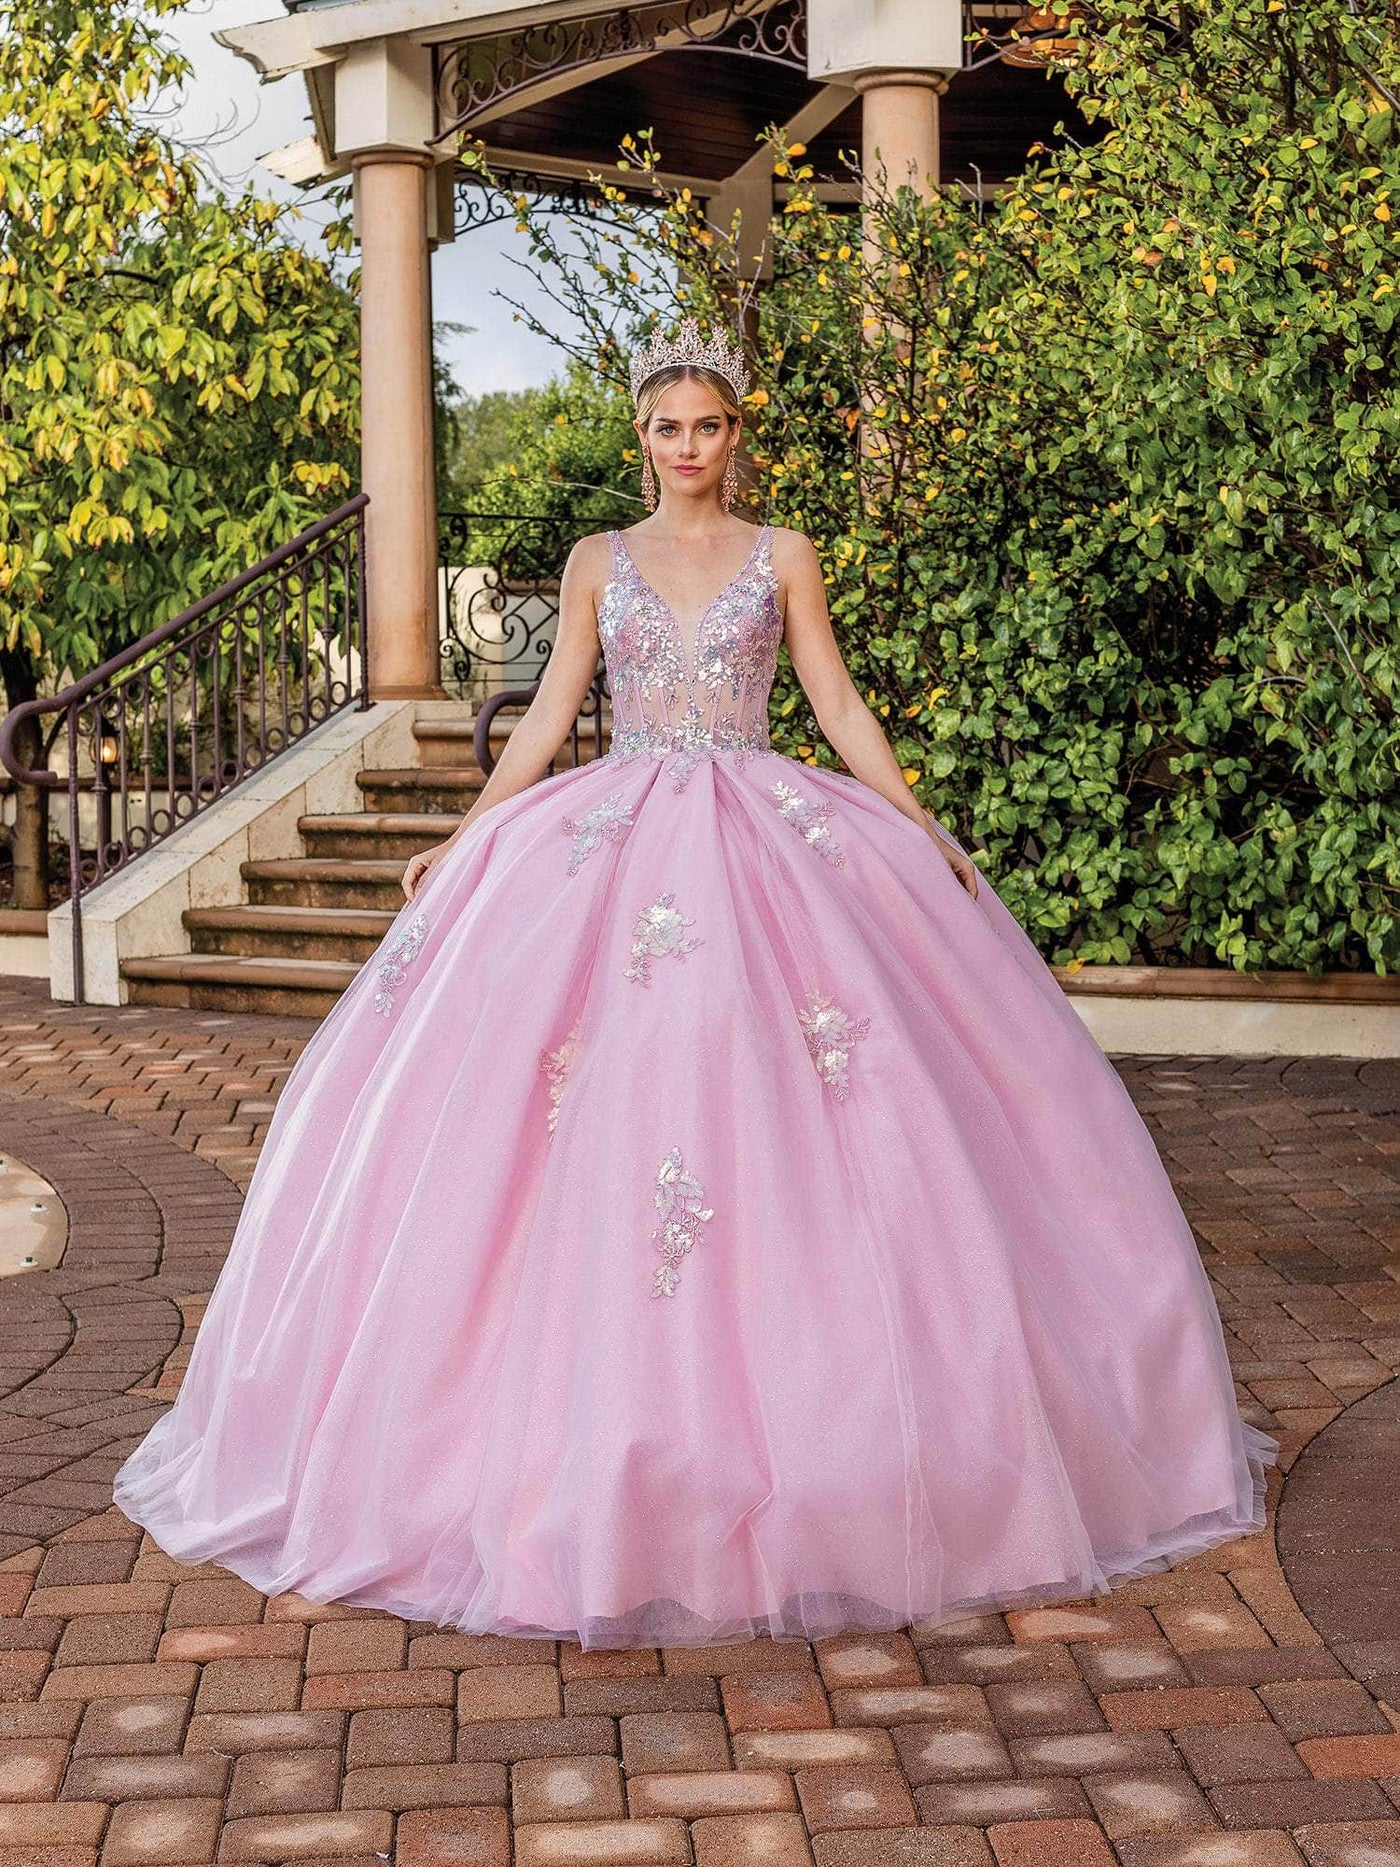 Dancing Queen 1896 - Sleeveless Pleated Skirt Ballgown Special Occasion Dresses